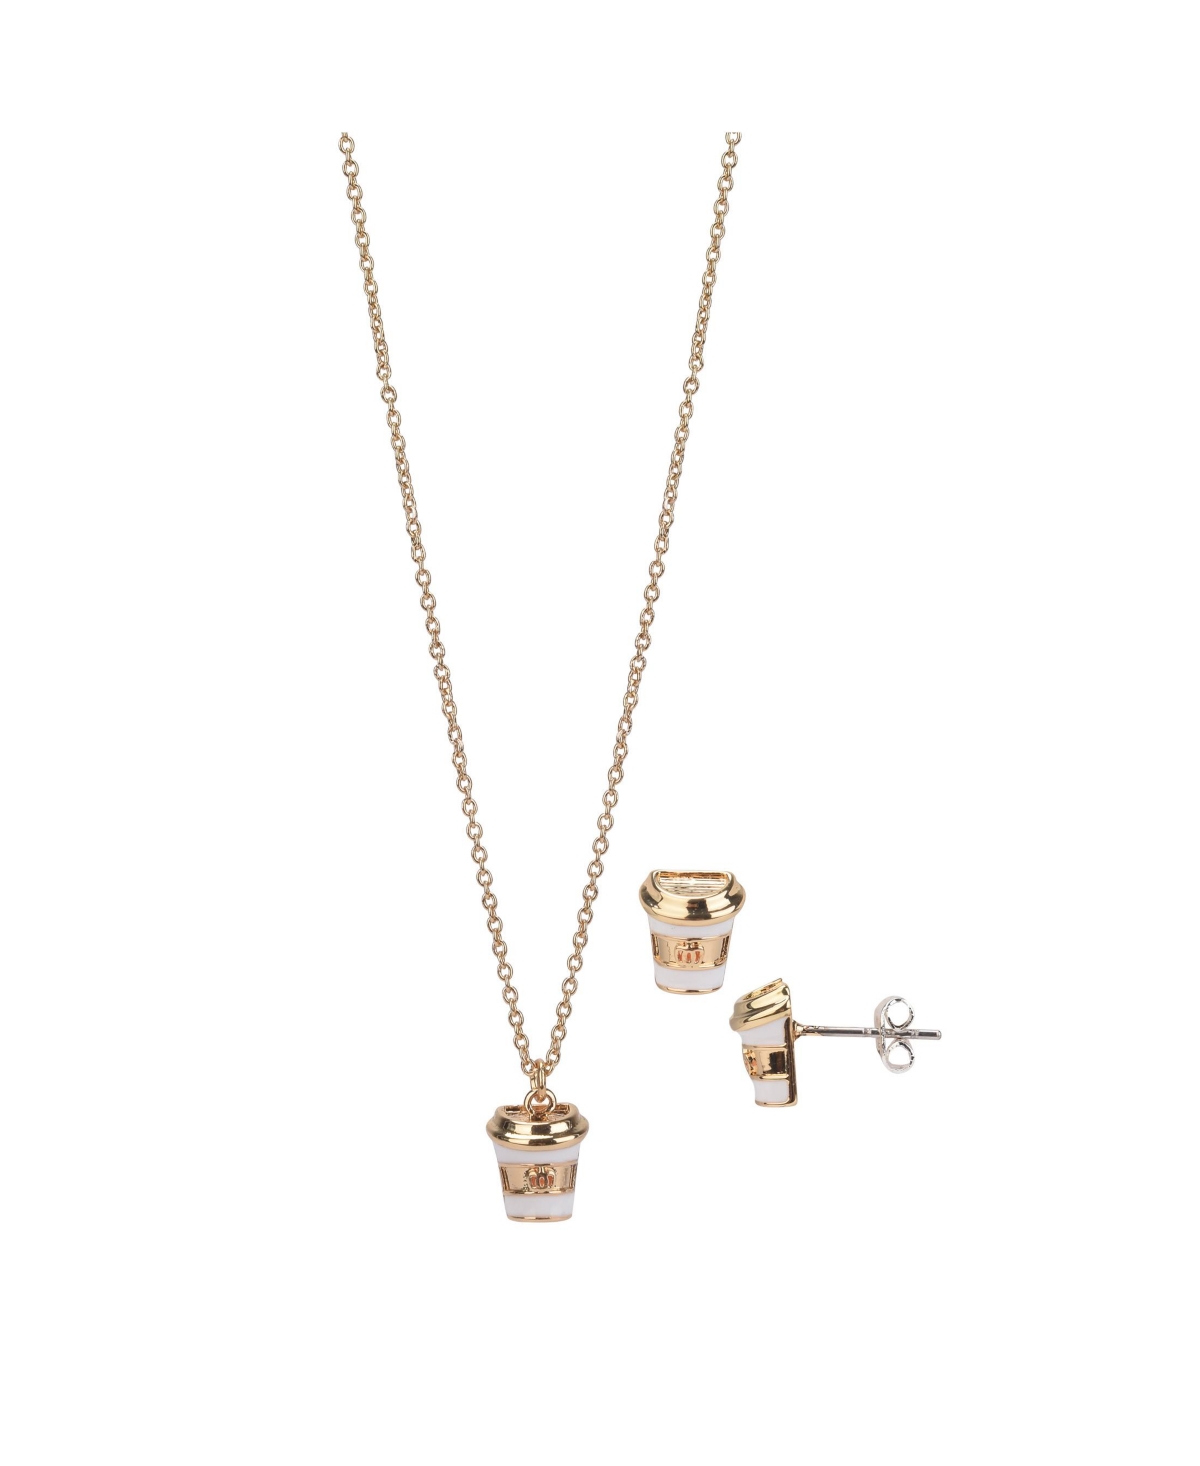 Fao Schwarz Gold Tone Latte Necklace And Earrings Set, 3 Pieces